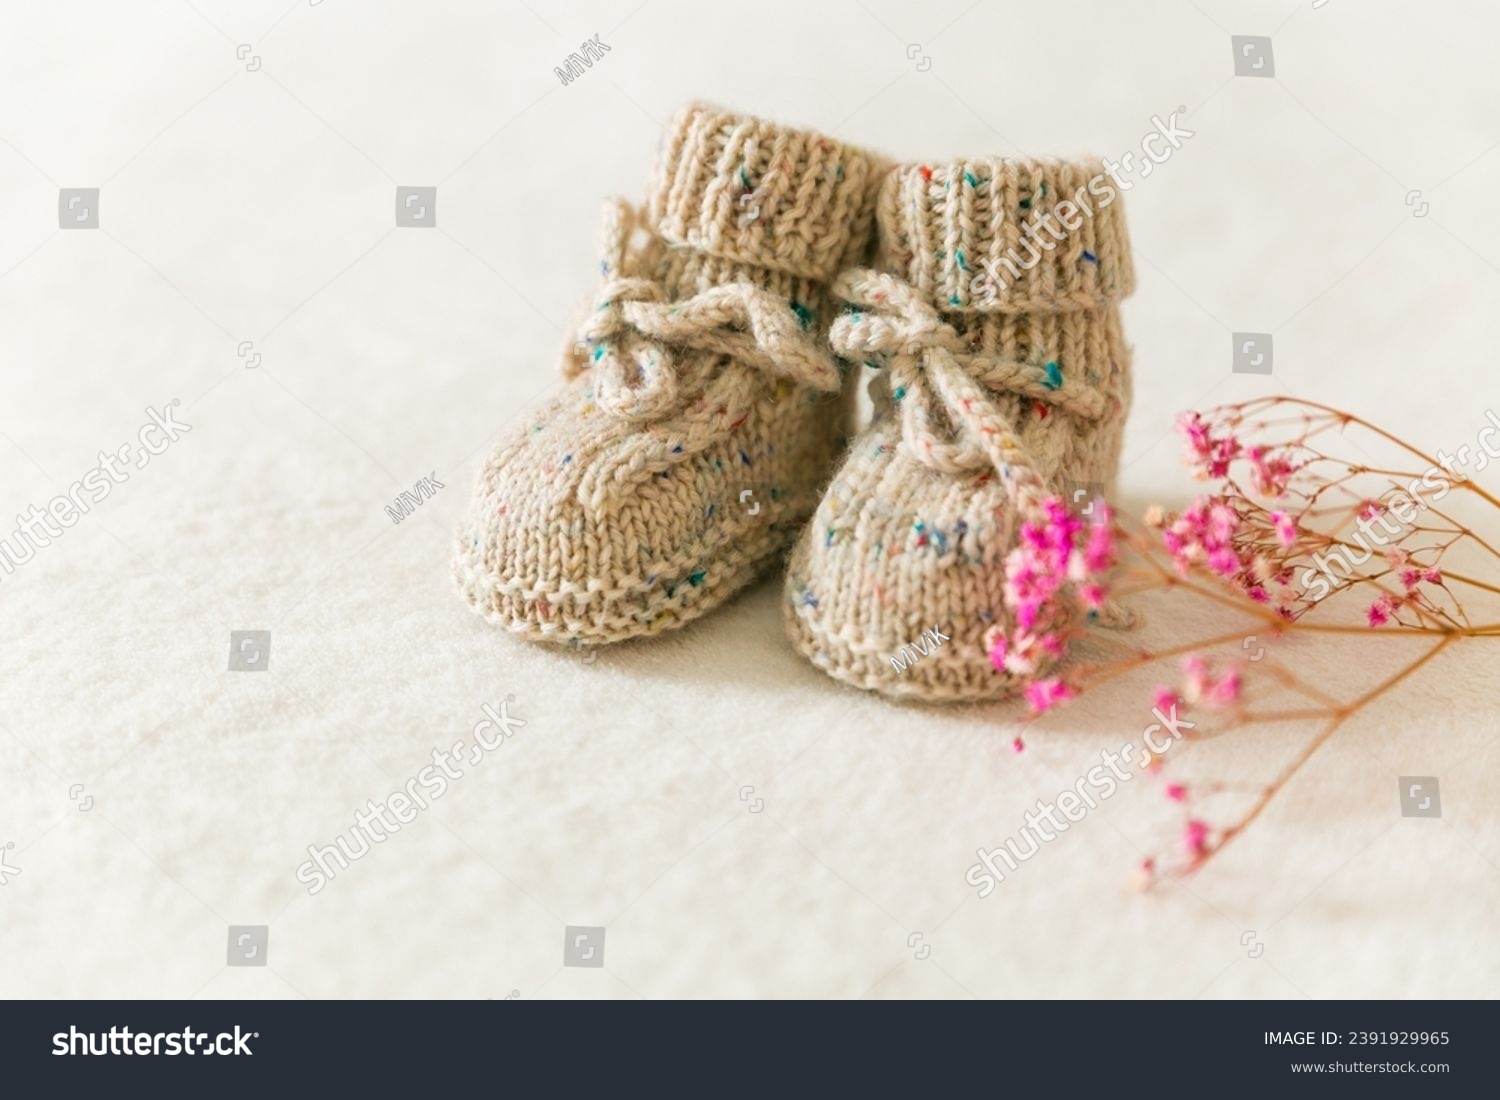 Knitted baby socks, booties on a white background with copy space. Pregnancy and motherhood concept, first birthday banner, handmade socks, baby warm clothes, handmade knitted socks, hobby. #2391929965